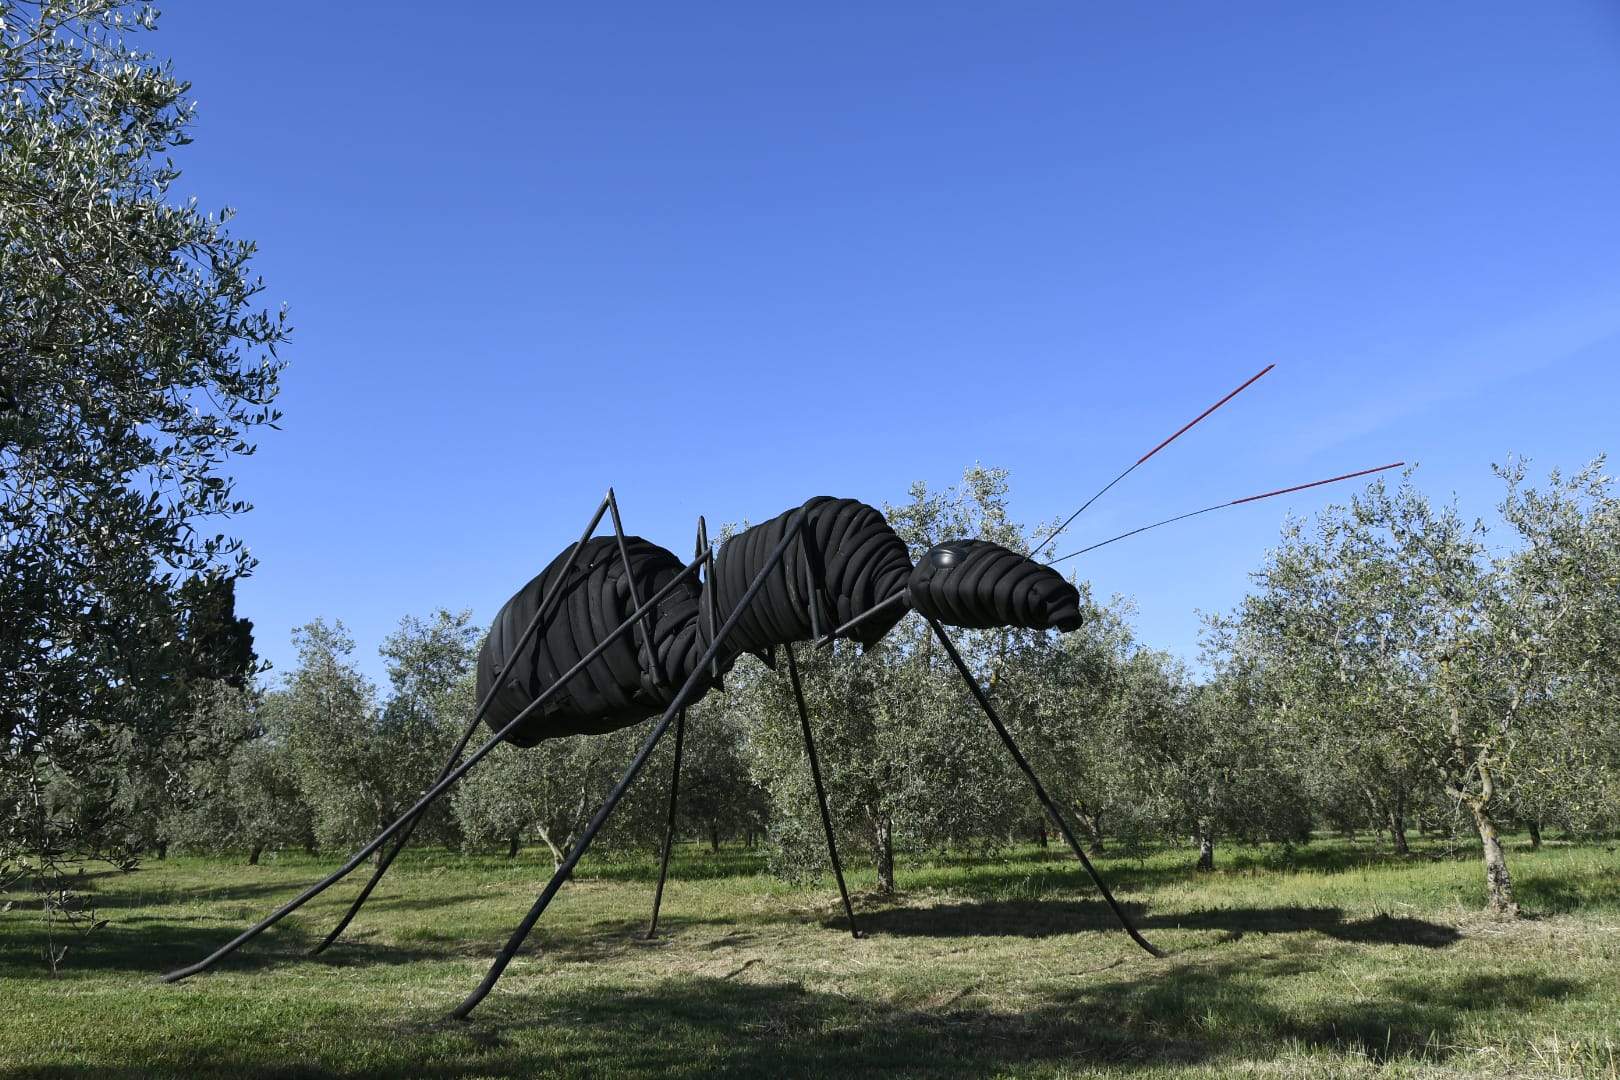 The second edition of the Biennale of Discard starts in Maremma